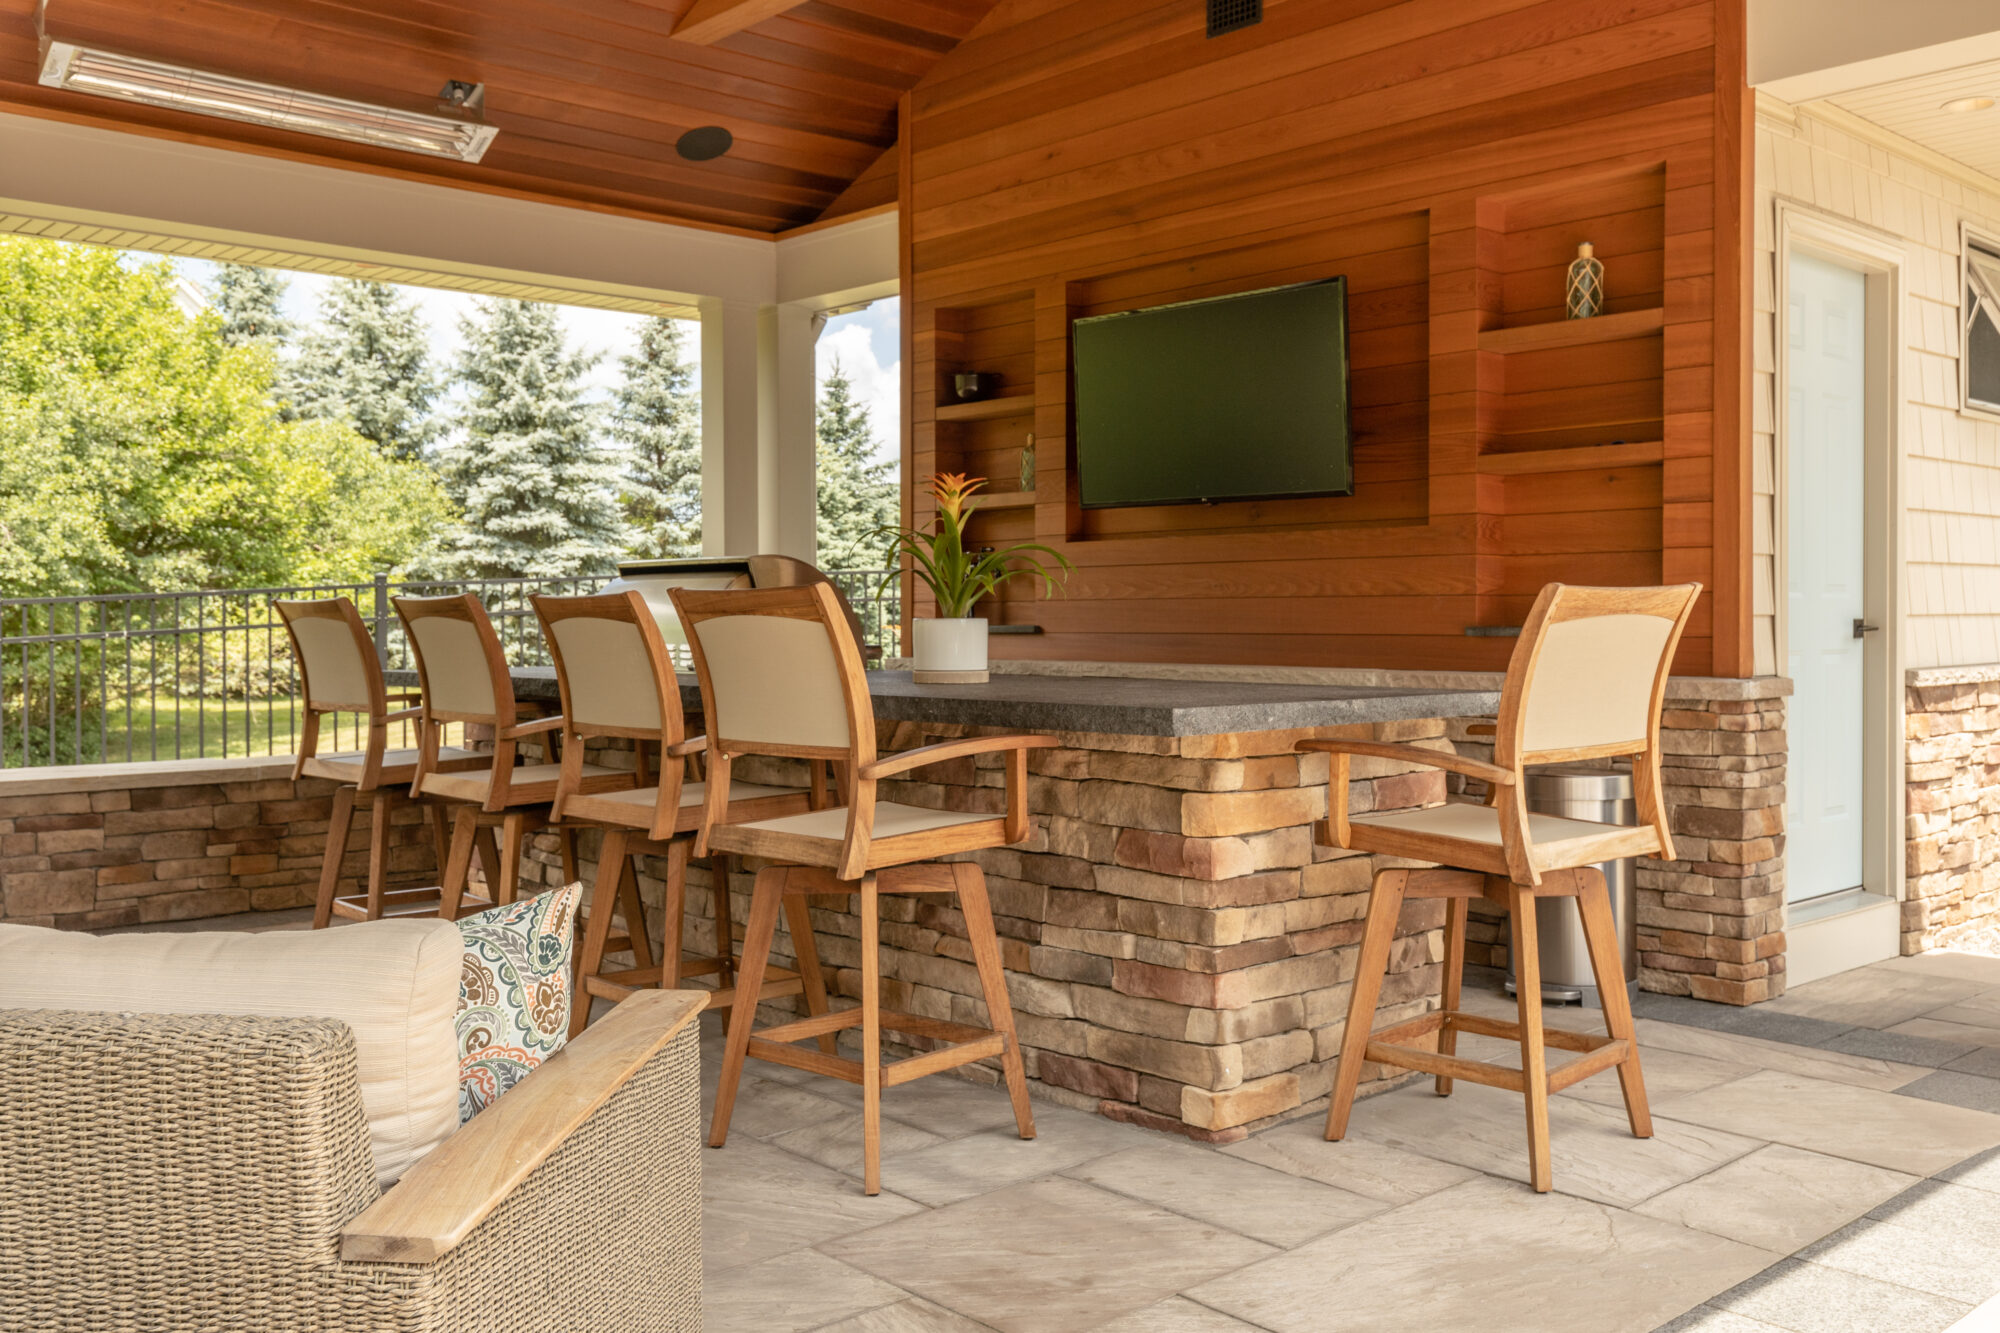 McNamara Inc's residential renovation project, displaying an outdoor patio with a cooking station, grill, minifridge, four barstools, and a TV mounted on the wall.